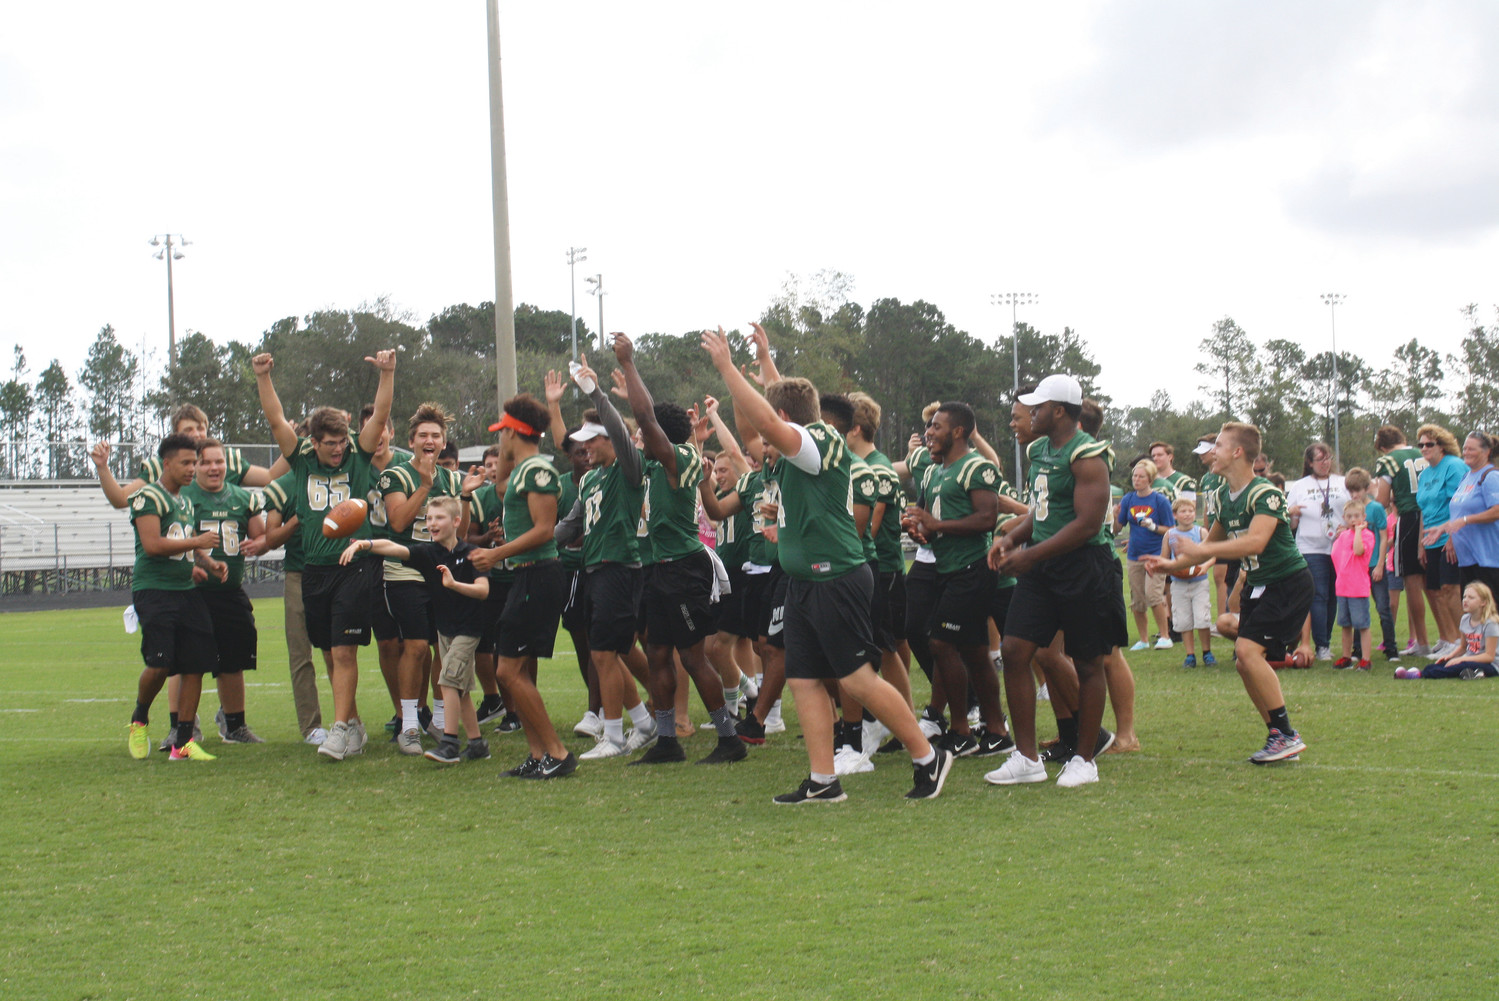 Special needs students from Valley Ridge Academy, Timberlin Creek Elementary and Wards Creek Elementary score touchdowns with the support of the Nease football team during the “Victory Day” event at Nease High School last Friday.